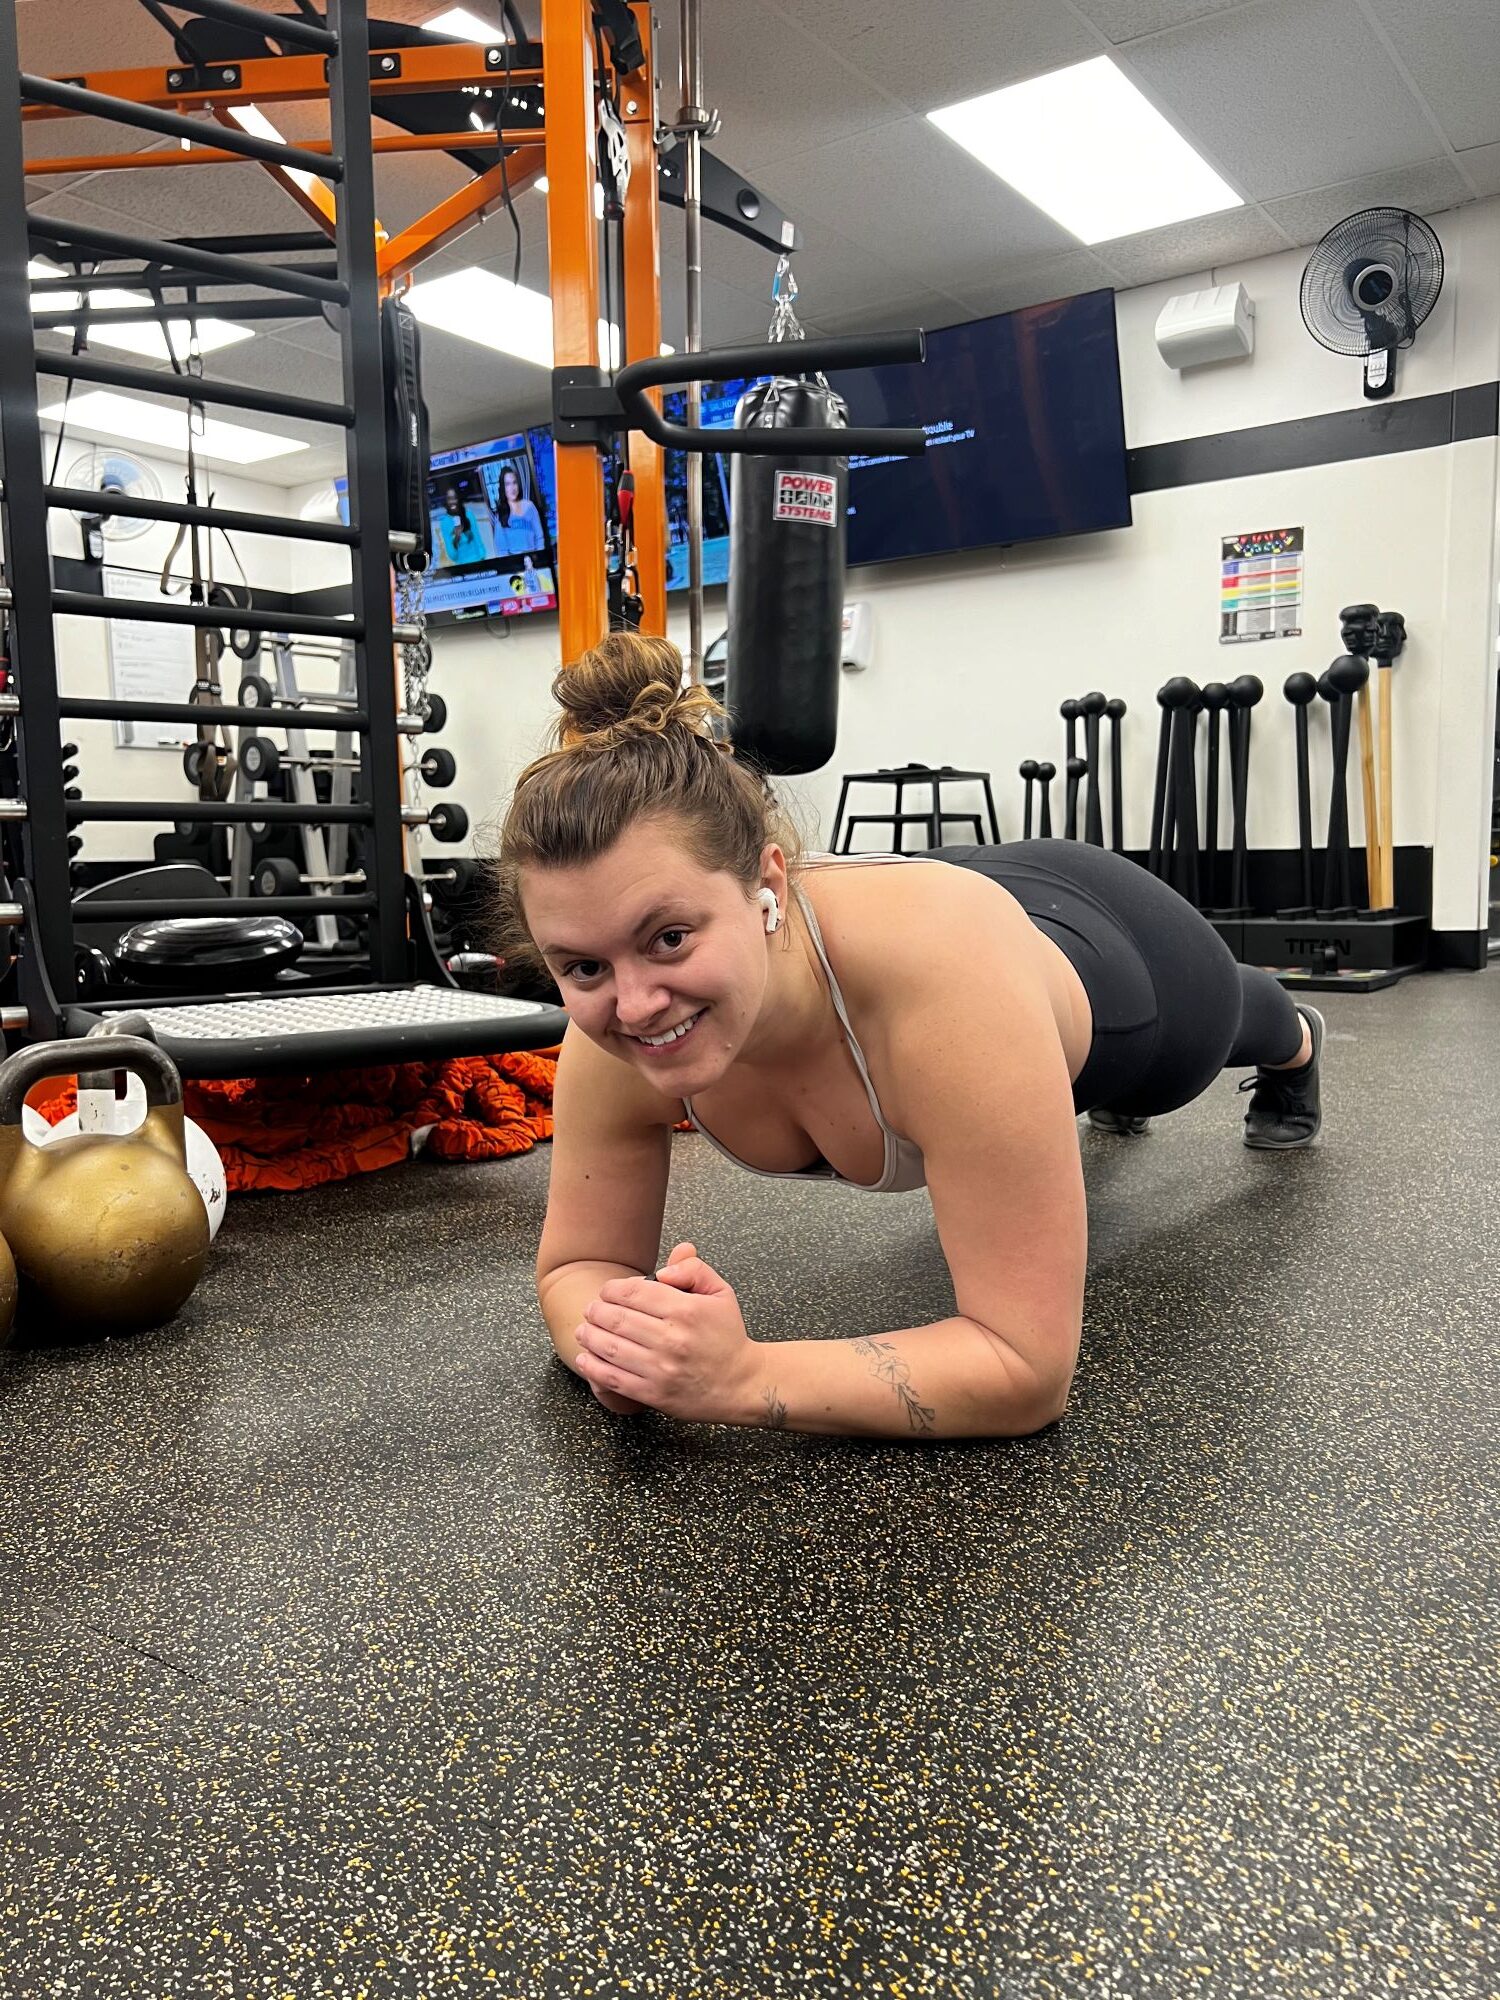 Smiling woman doing a forearm plank at AFAC gym